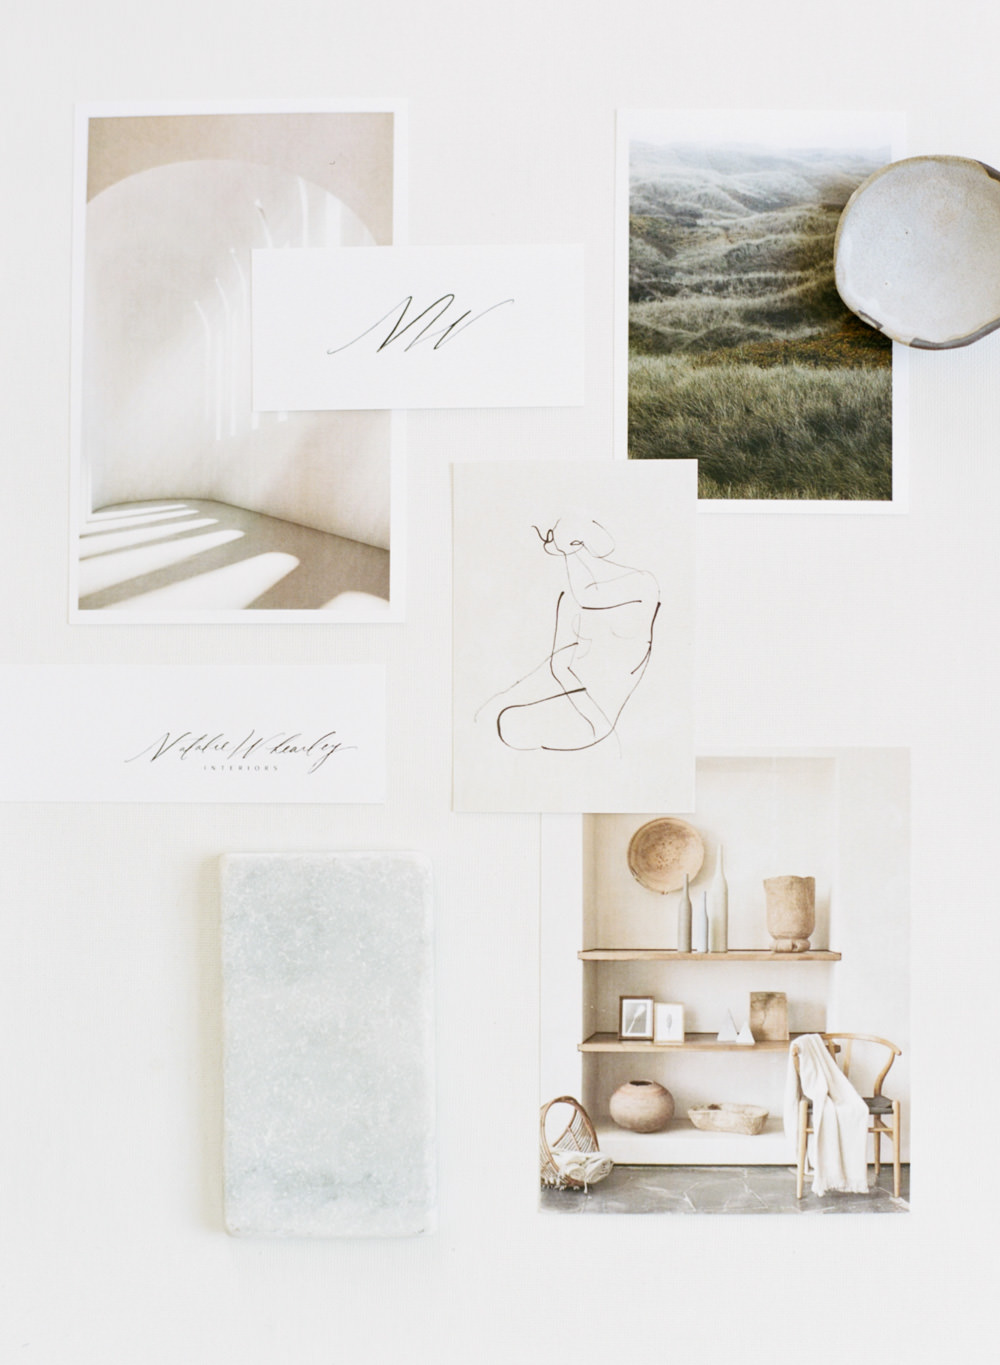 Business Lifestyle + Branding Content Photoshoot for San Fransisco based Designer Natalie Whearley | interiors, inspiration, minimalism, simple, califorina | Anna Peters, Seattle Wedding and Lifestyle Photography